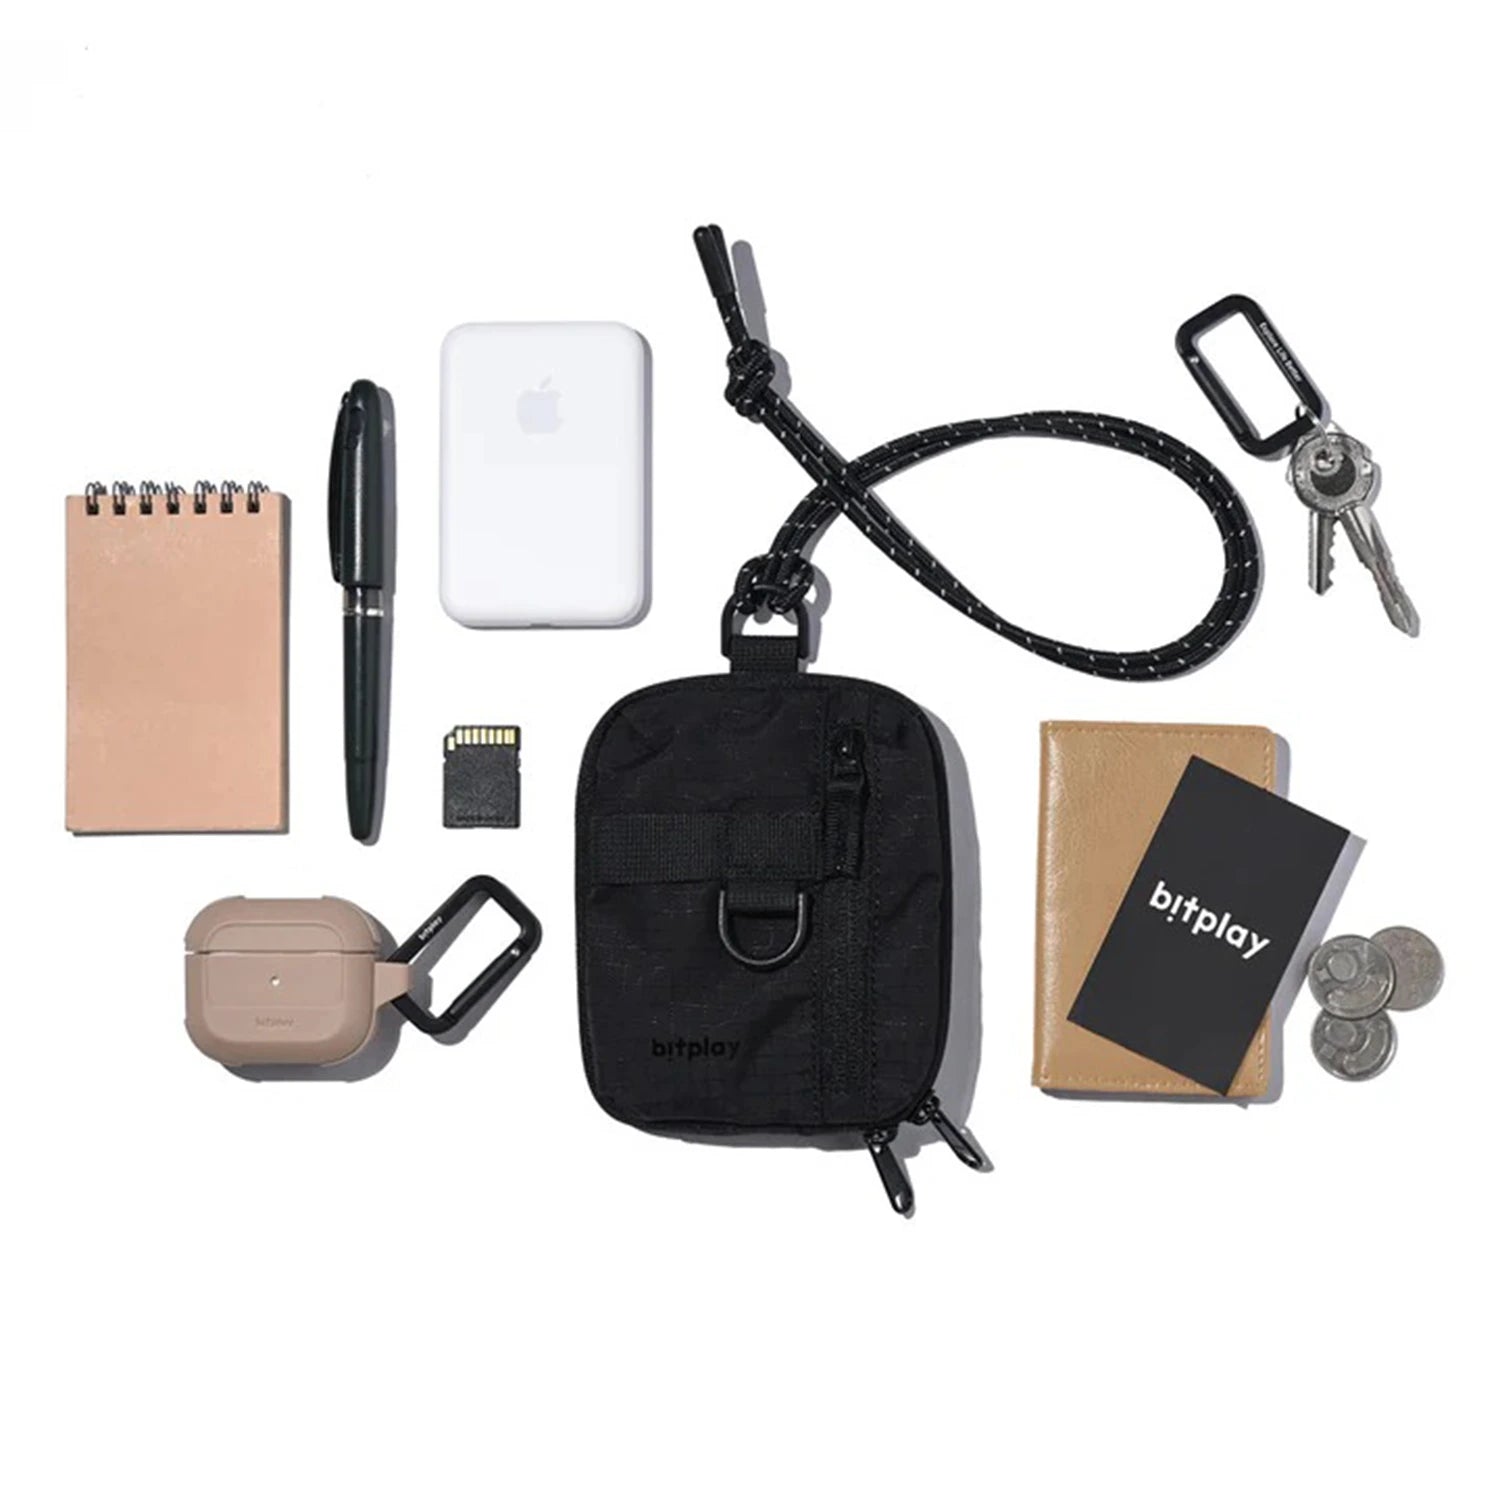 Ringke Mini Pouch [Block] Nylon Carrying Pouch Small Bag for AirPods,  Galaxy Buds, Earphones, Cards, ID - Black